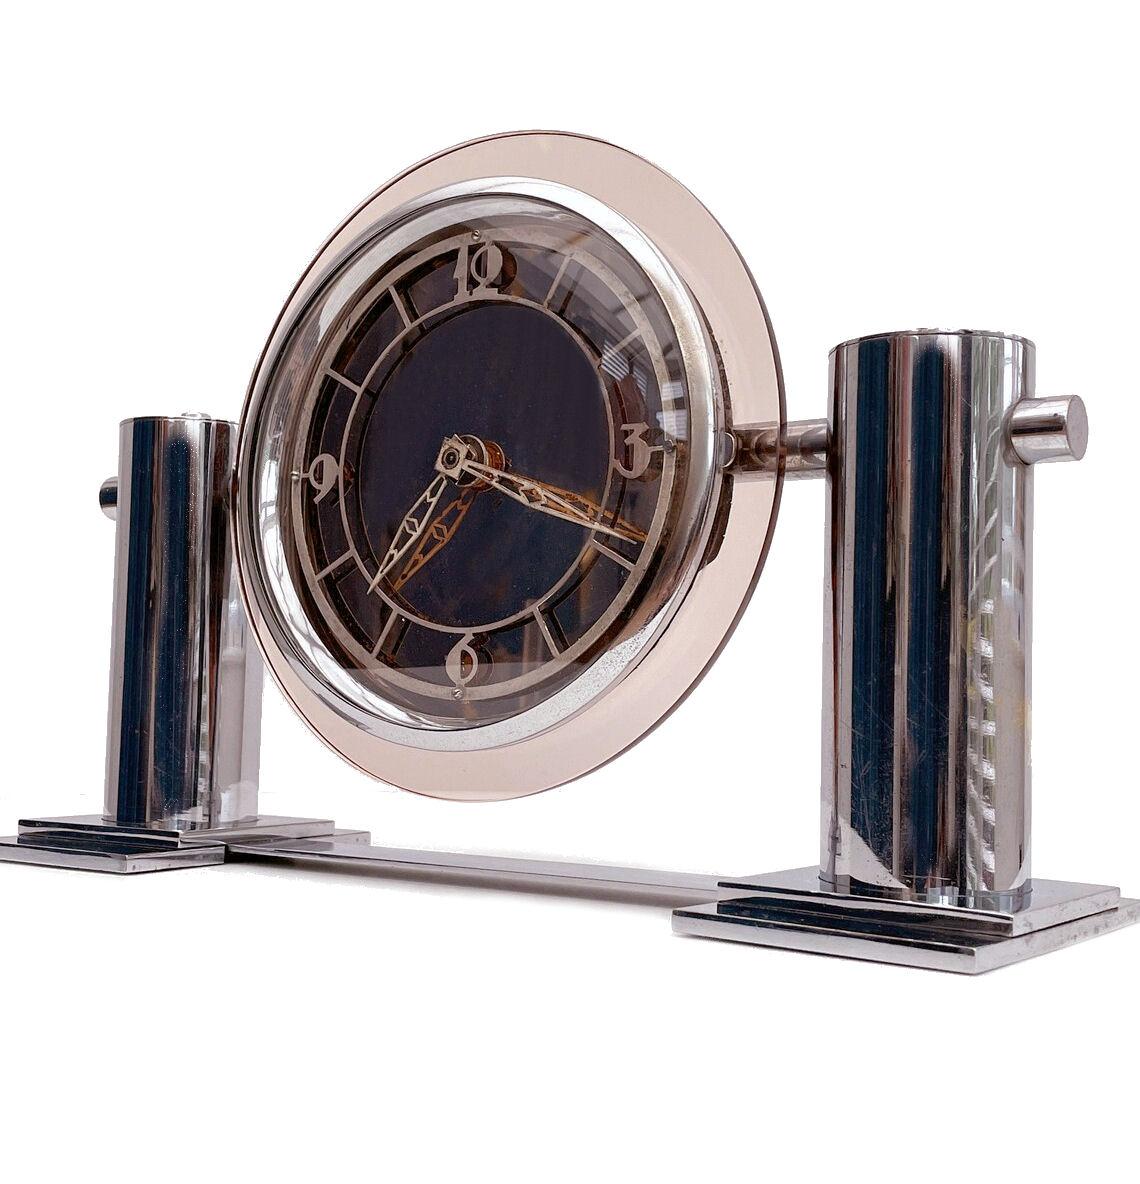 Art Deco Large Modernist Mantle Mirrored Clock, Circa 1930 In Good Condition For Sale In Devon, England